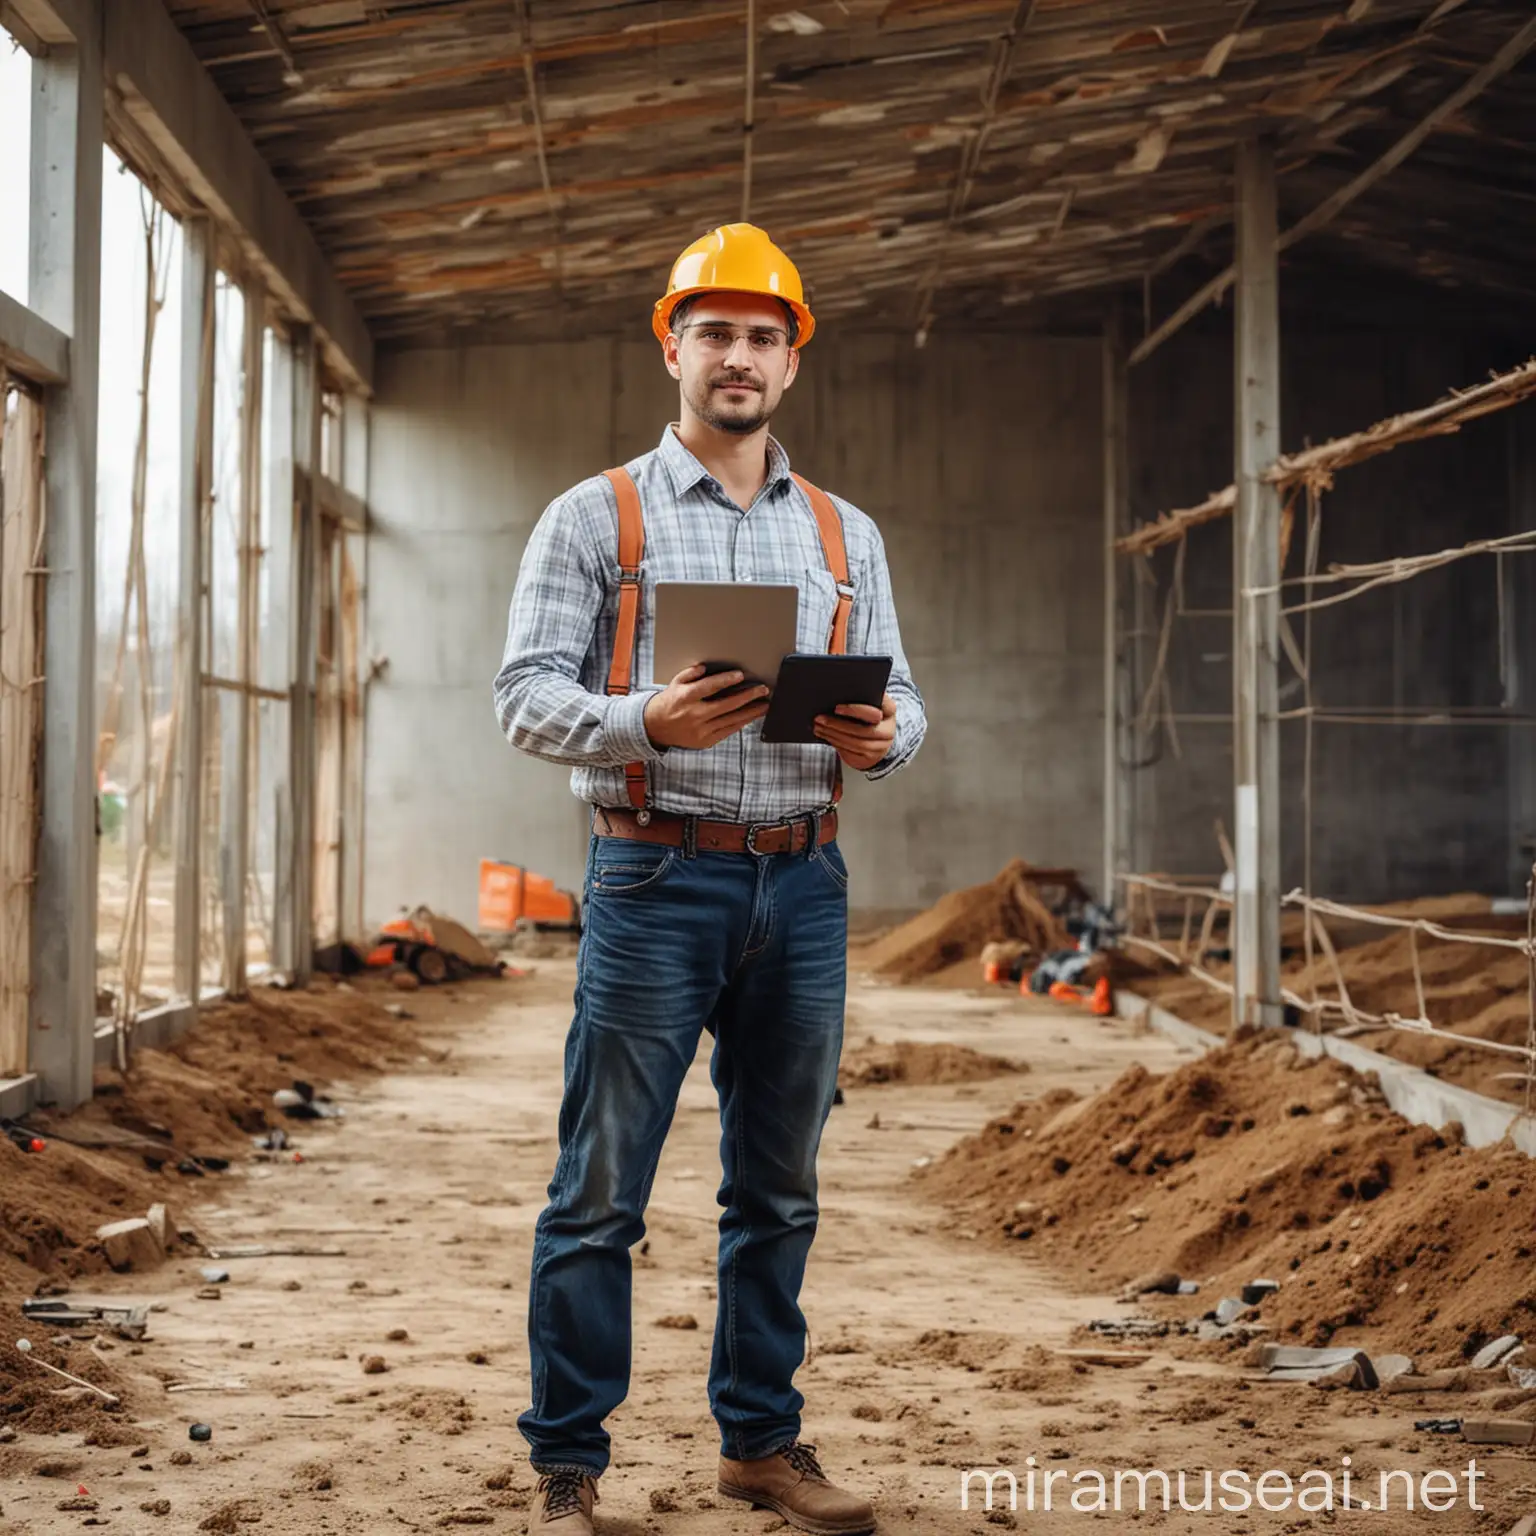   IT specialist and Engineer and  farmer as one person, at Construction, full body